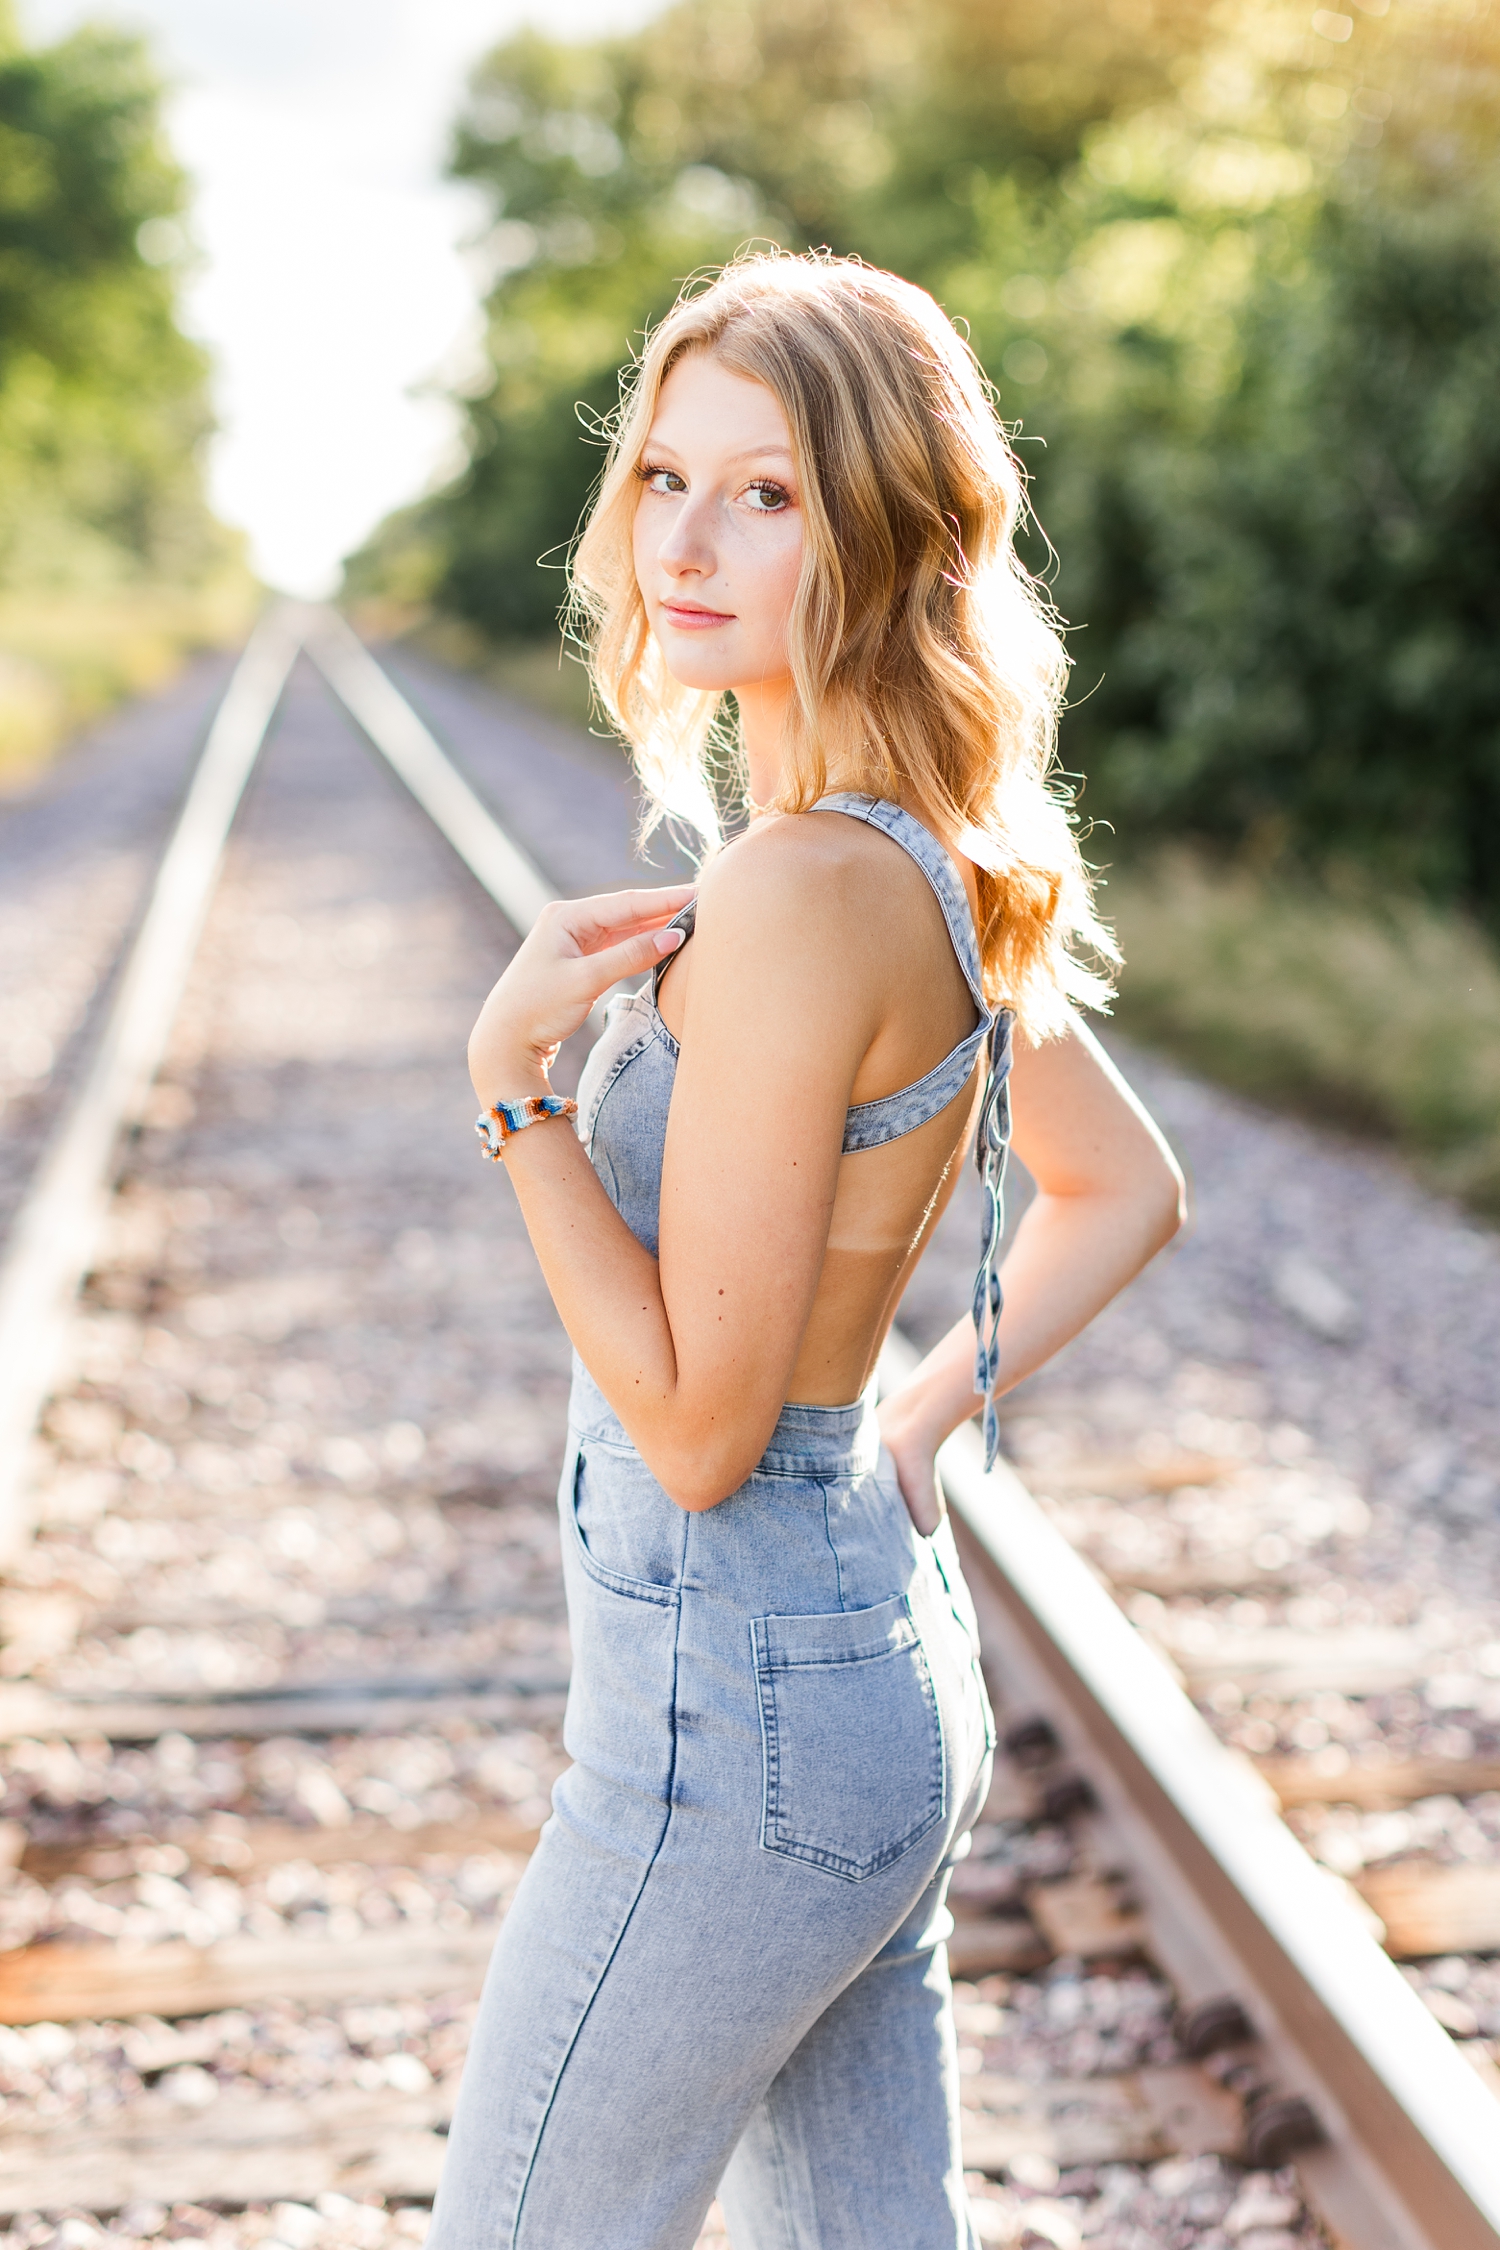 Ryley stands on railroad tracks and looks over her shoulder | CB Studio